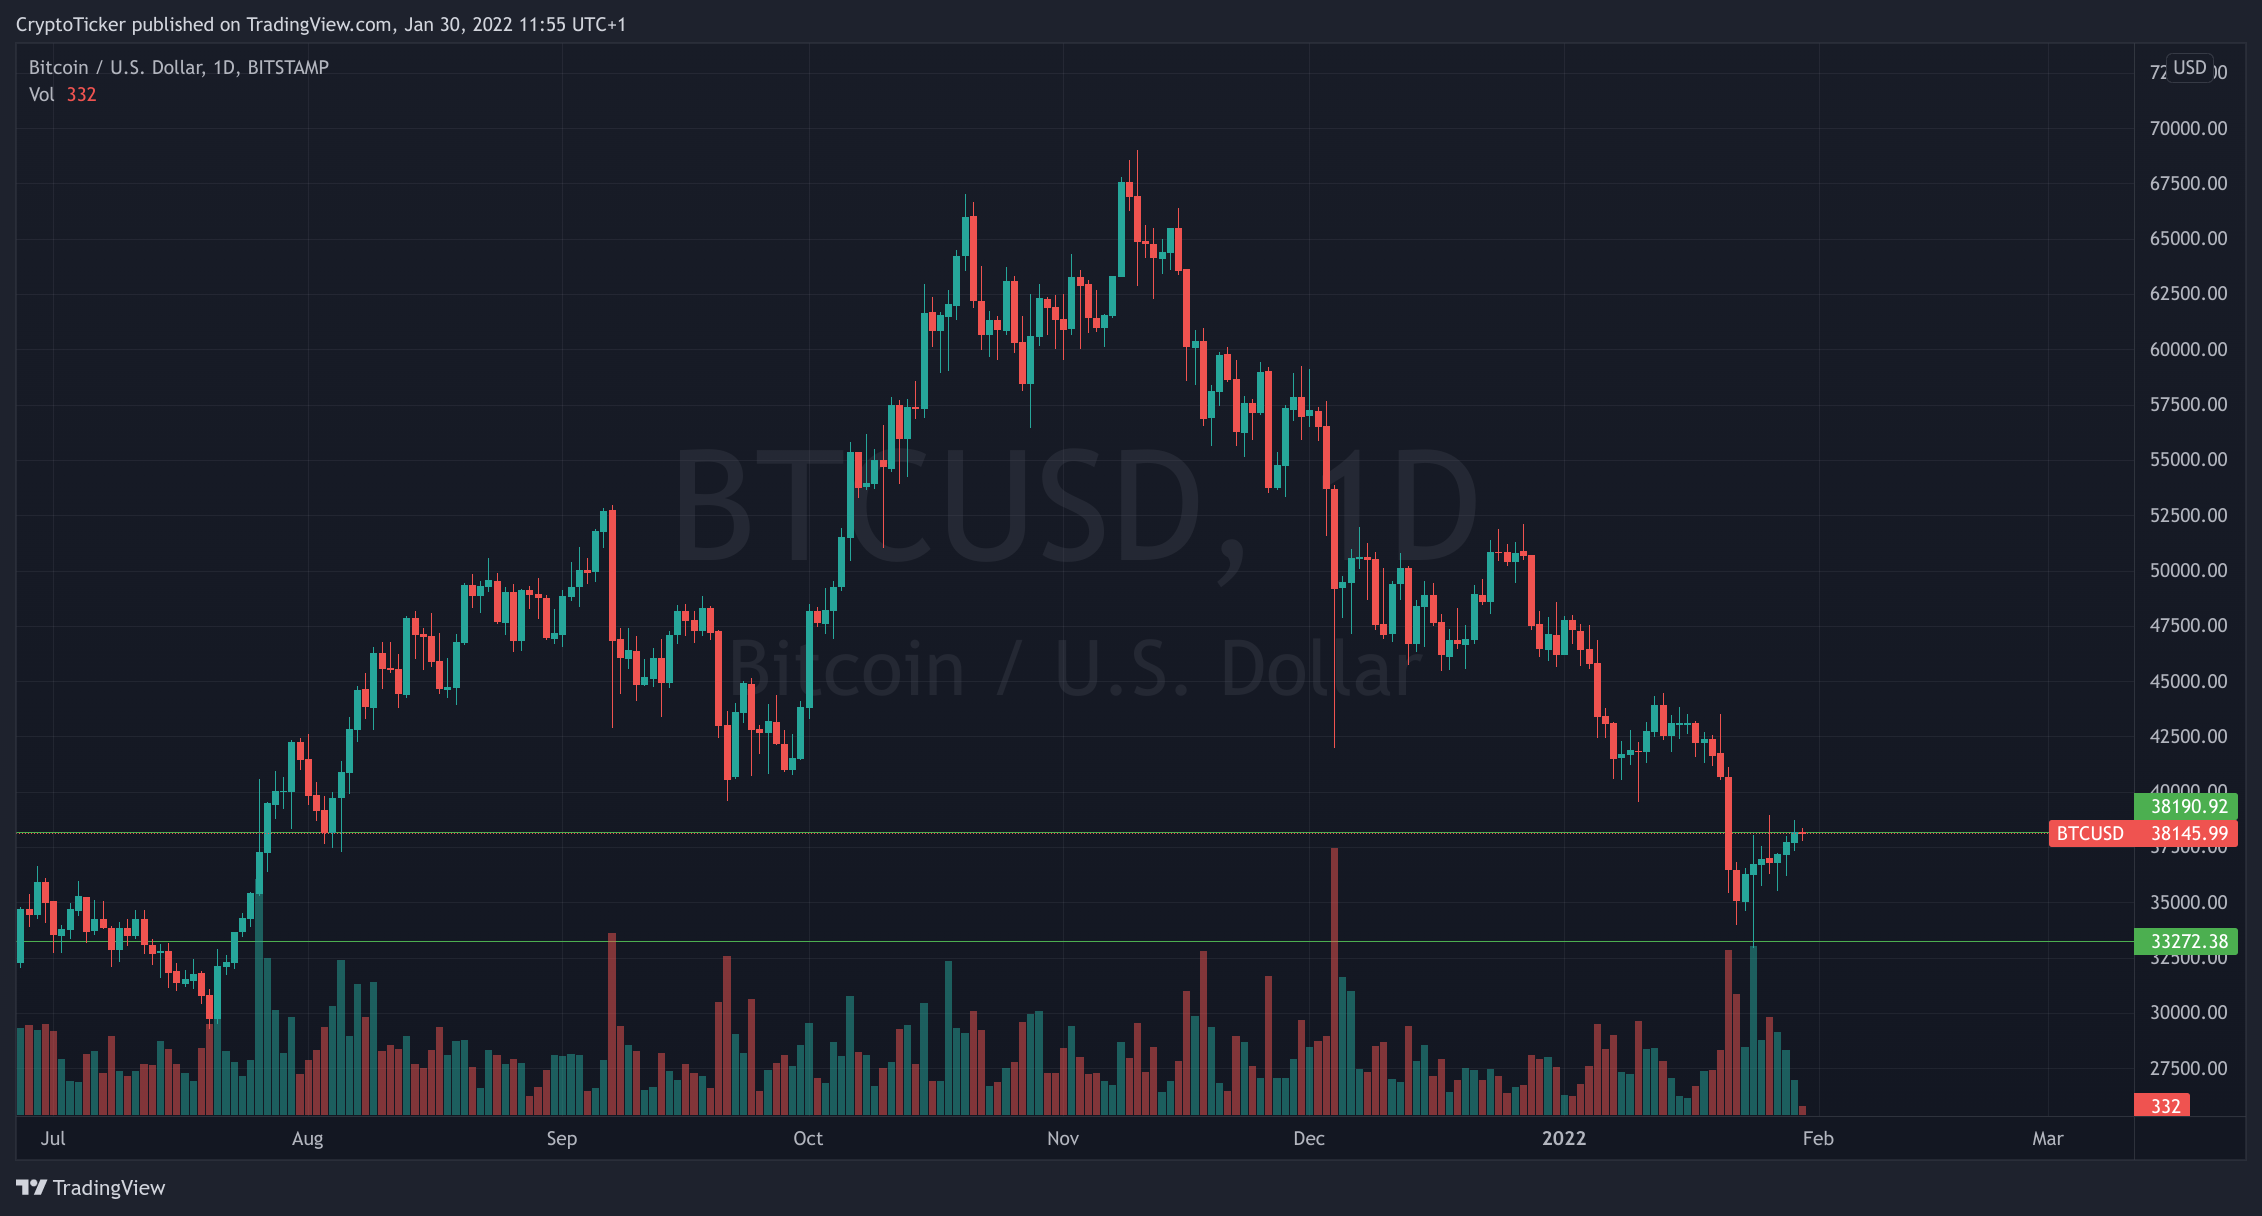 Bitcoin price - BTC/USD 1-day chart showing the break of the resistance